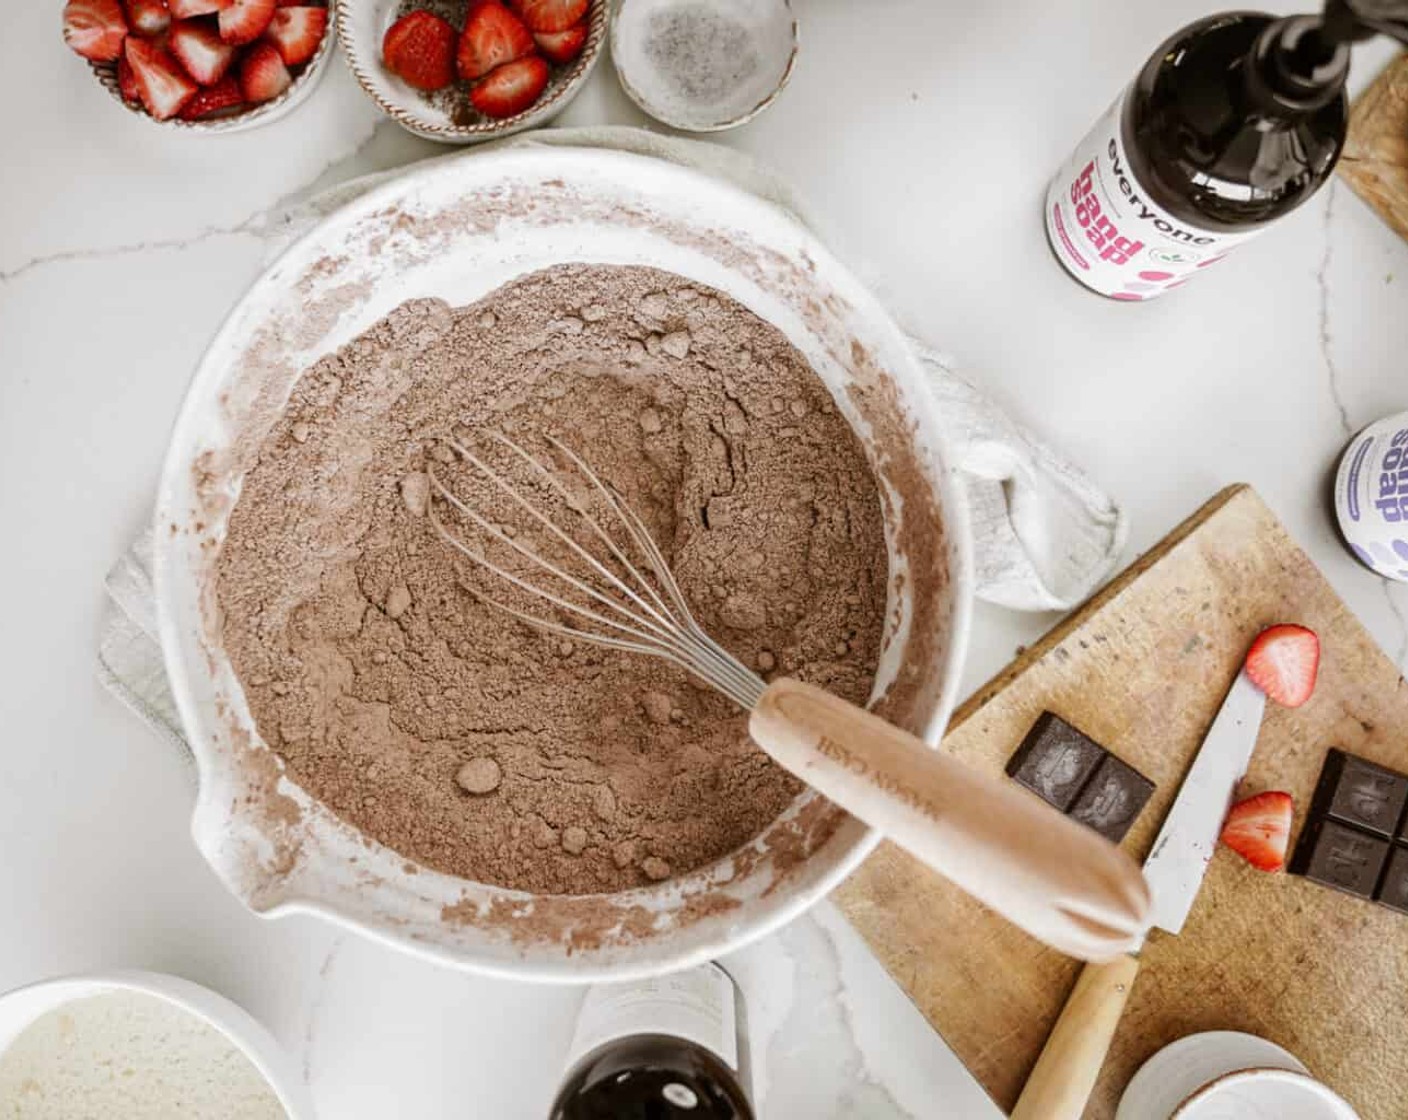 step 4 To a large bowl, add your Brown Sugar (2 cups), All-Purpose Flour (2 cups), Unsweetened Cocoa Powder (1/2 cup), Baking Powder (1 1/2 Tbsp), Baking Soda (1/2 Tbsp), and Salt (1 pinch). Whisk till well combined and there are no lumps.